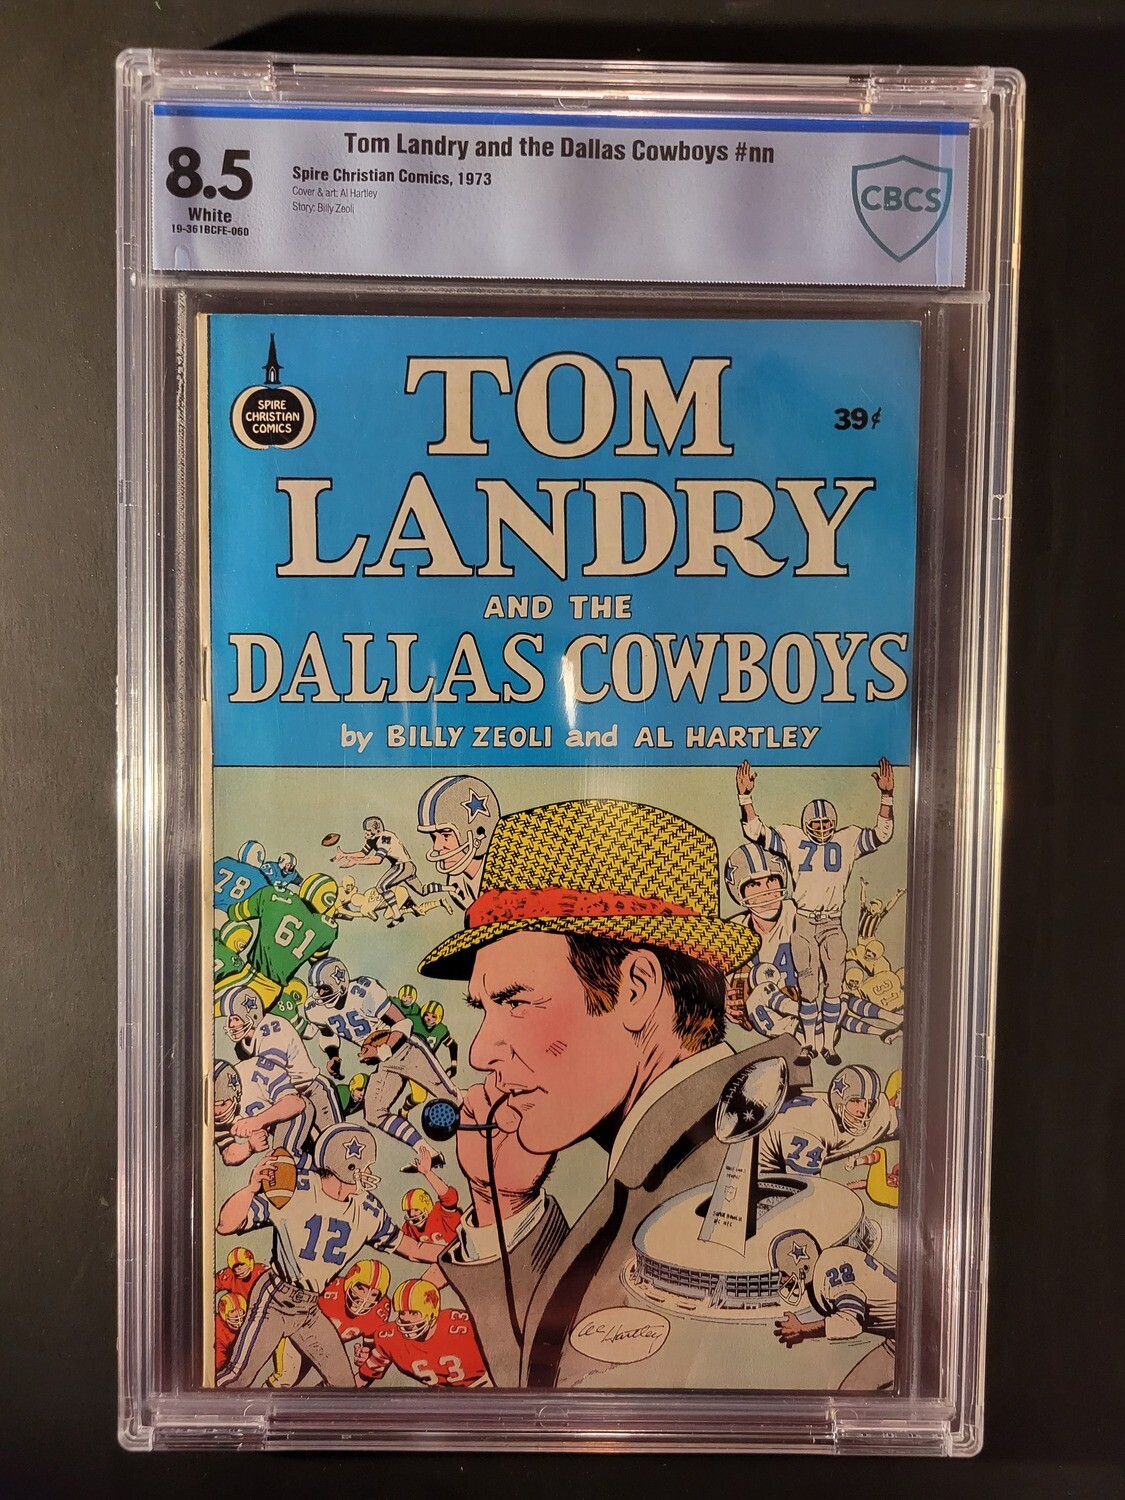 Tom Landry and the Dallas Cowboys #1 [39cents] CBCS 8.5